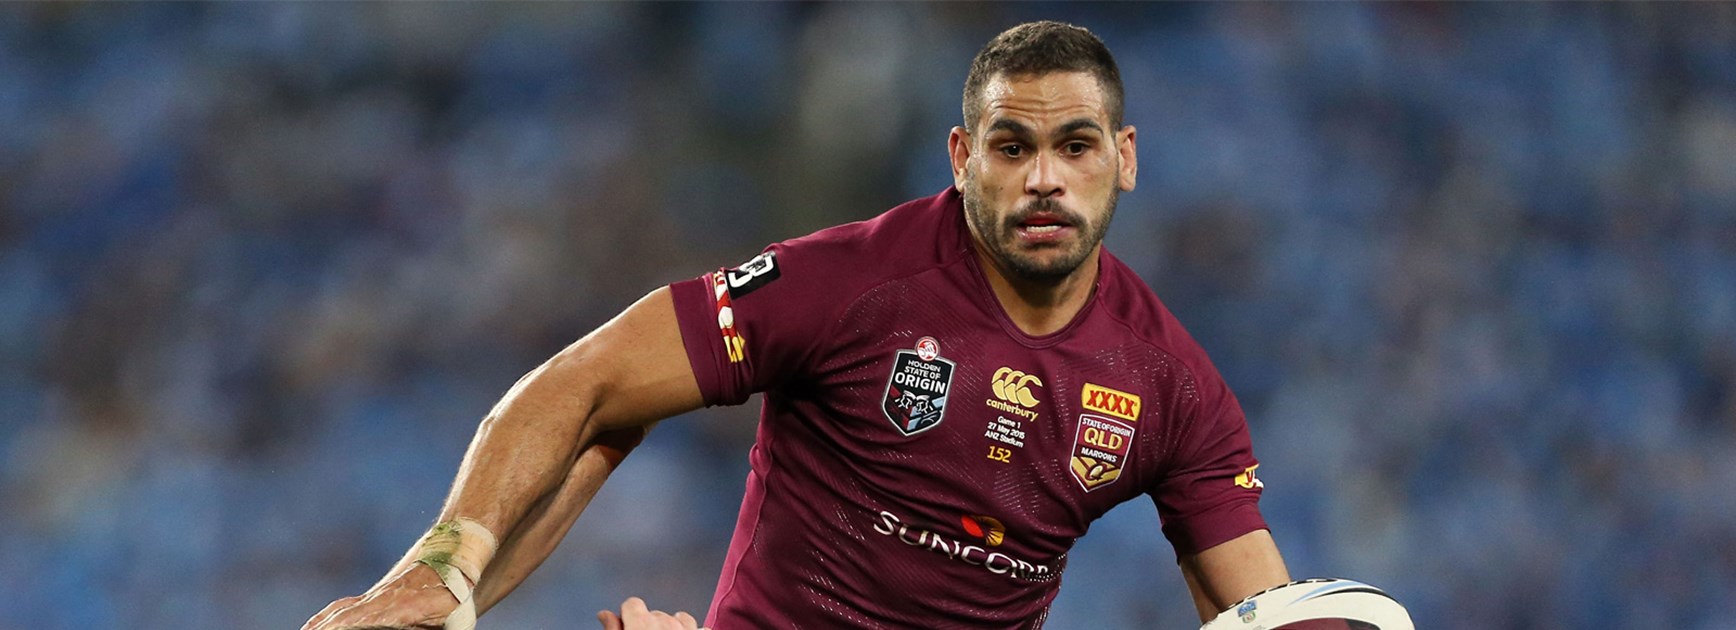 Greg Inglis says he's happy to do whatever job is asked of him if it helps Queensland regain the State of Origin shield.